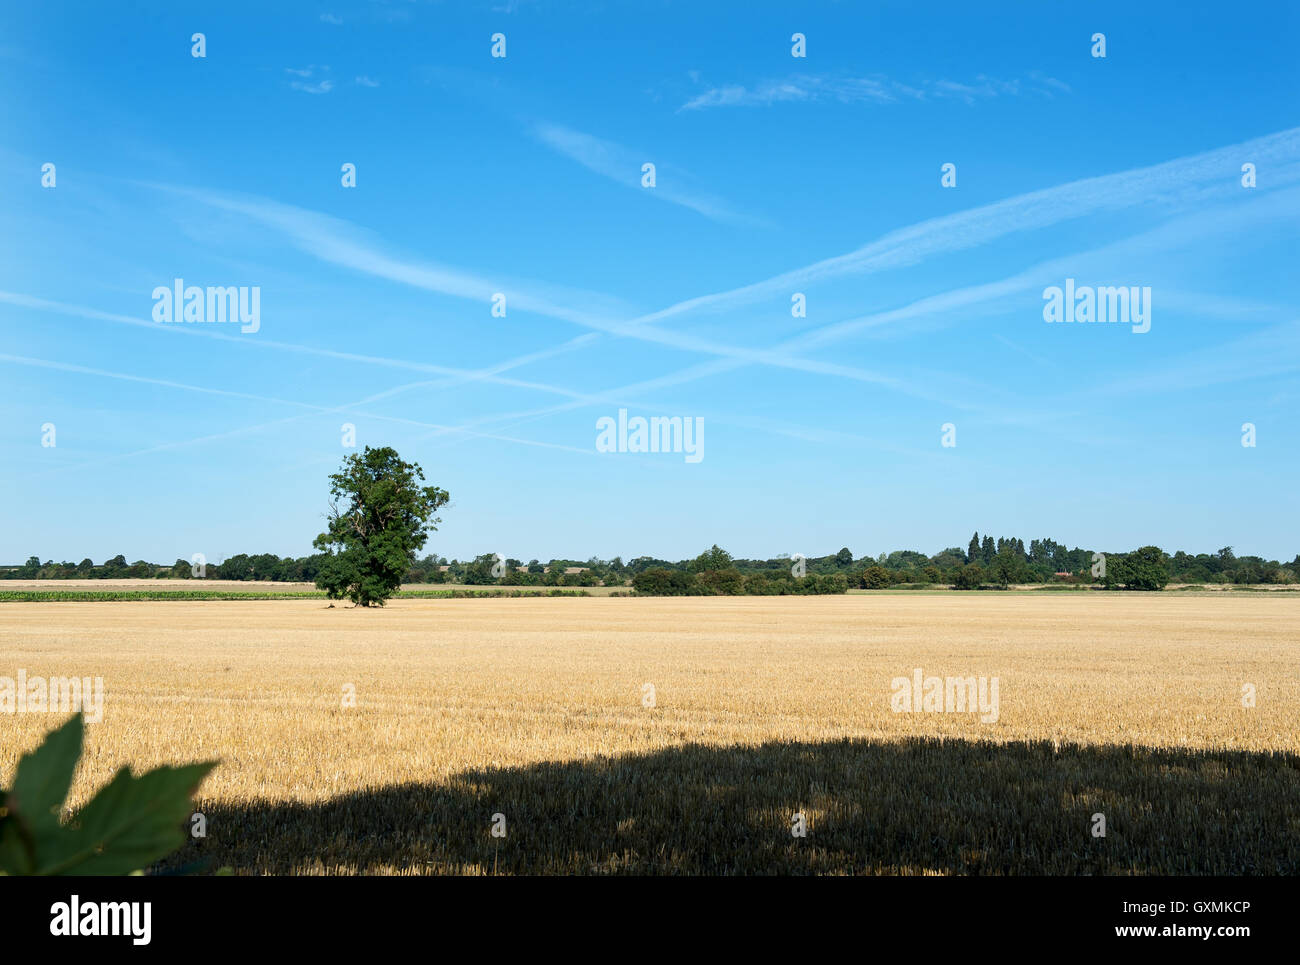 Tall weed against a background of a ripe wheat field ready for harvesting Stock Photo